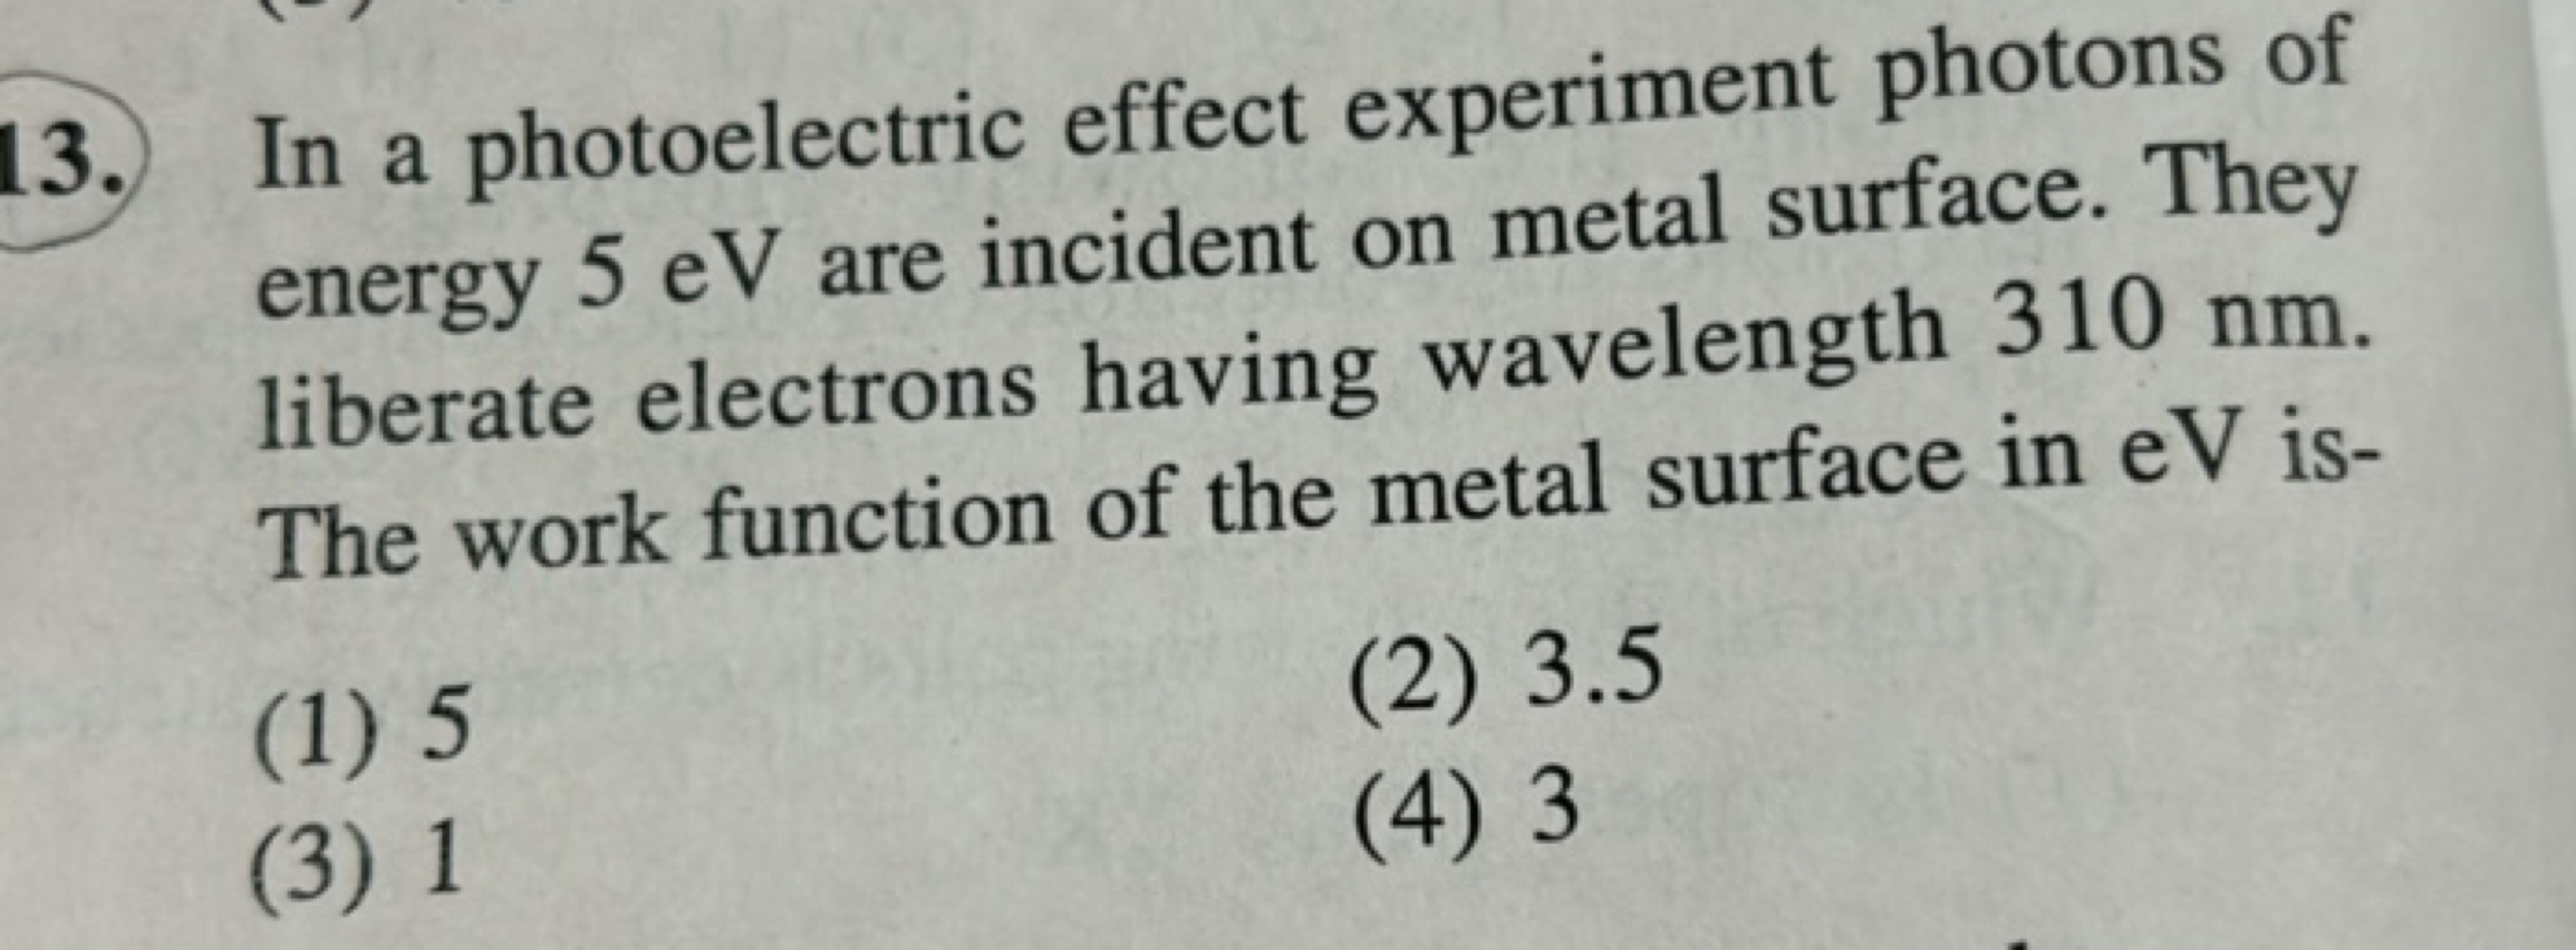 In a photoelectric effect experiment photons of energy 5eV are inciden